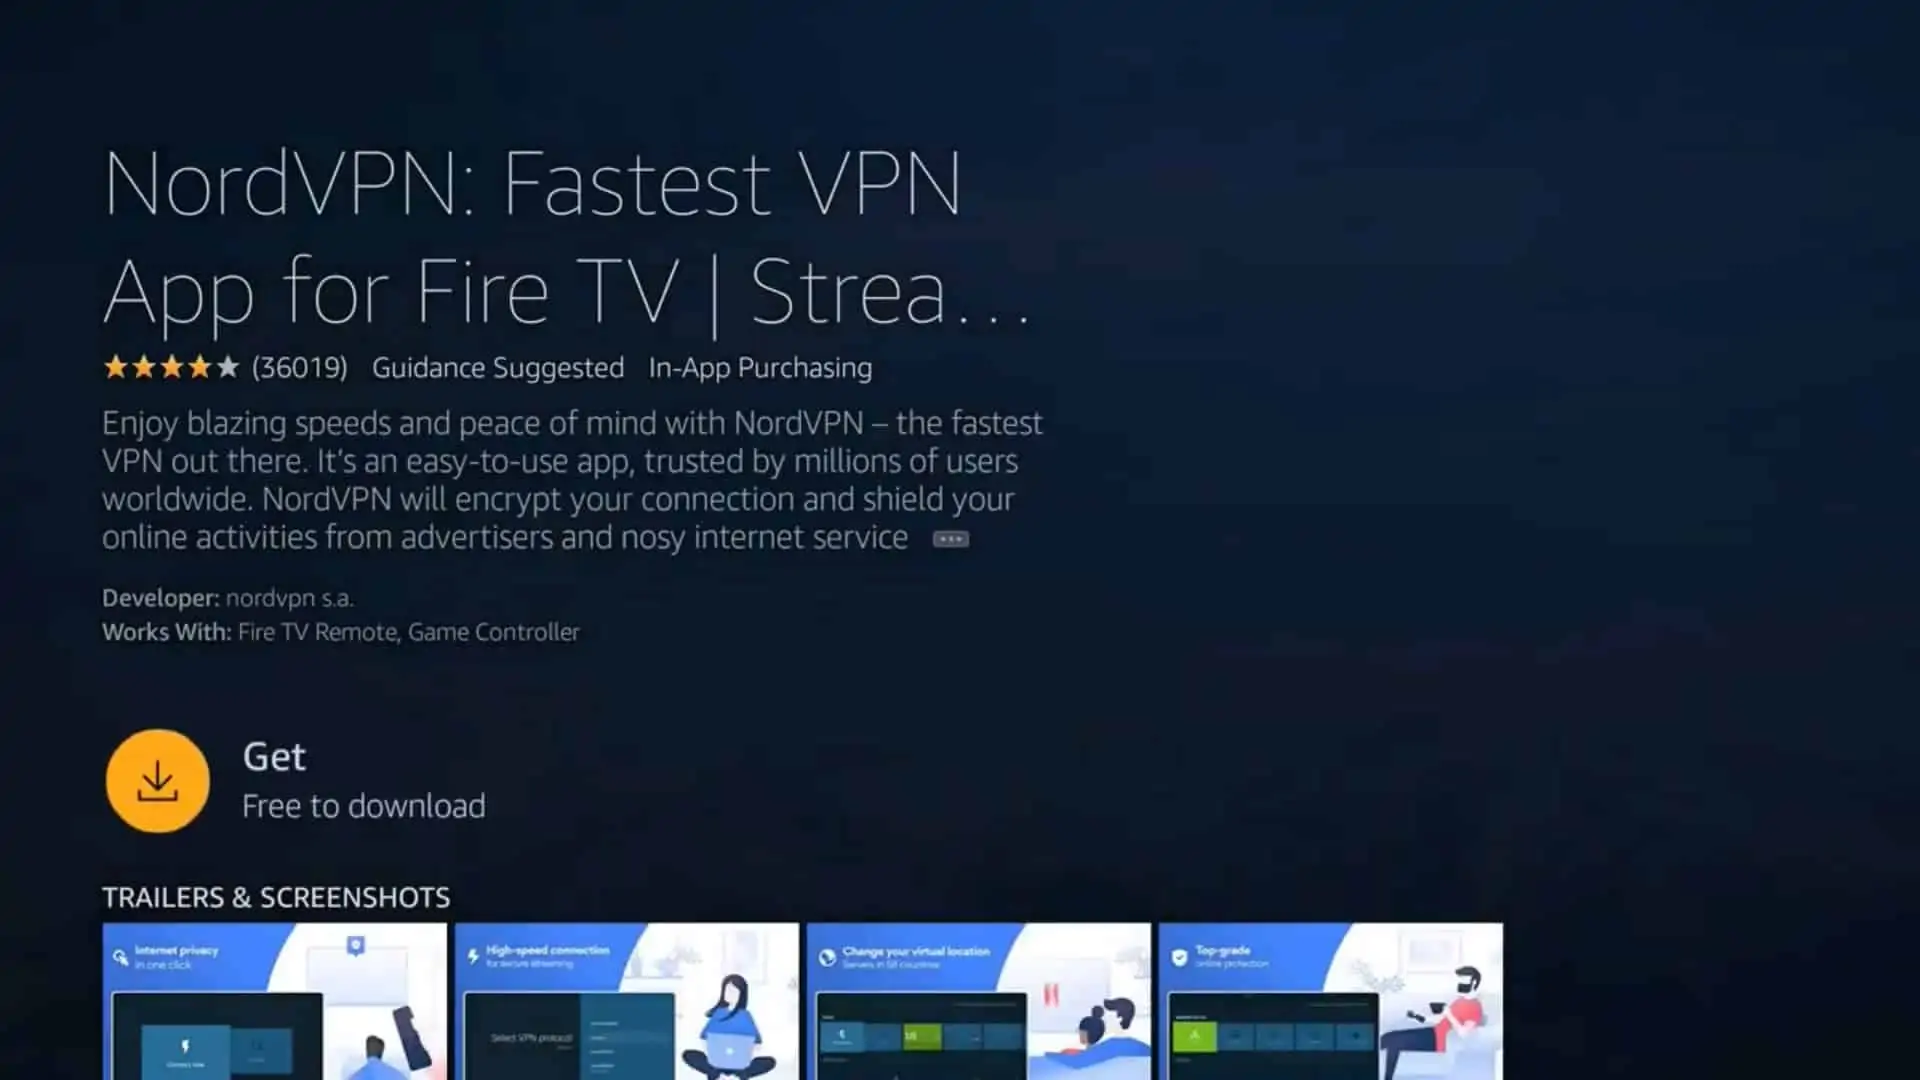 How to Install a VPN on Amazon Firestick TV in under 1 minute